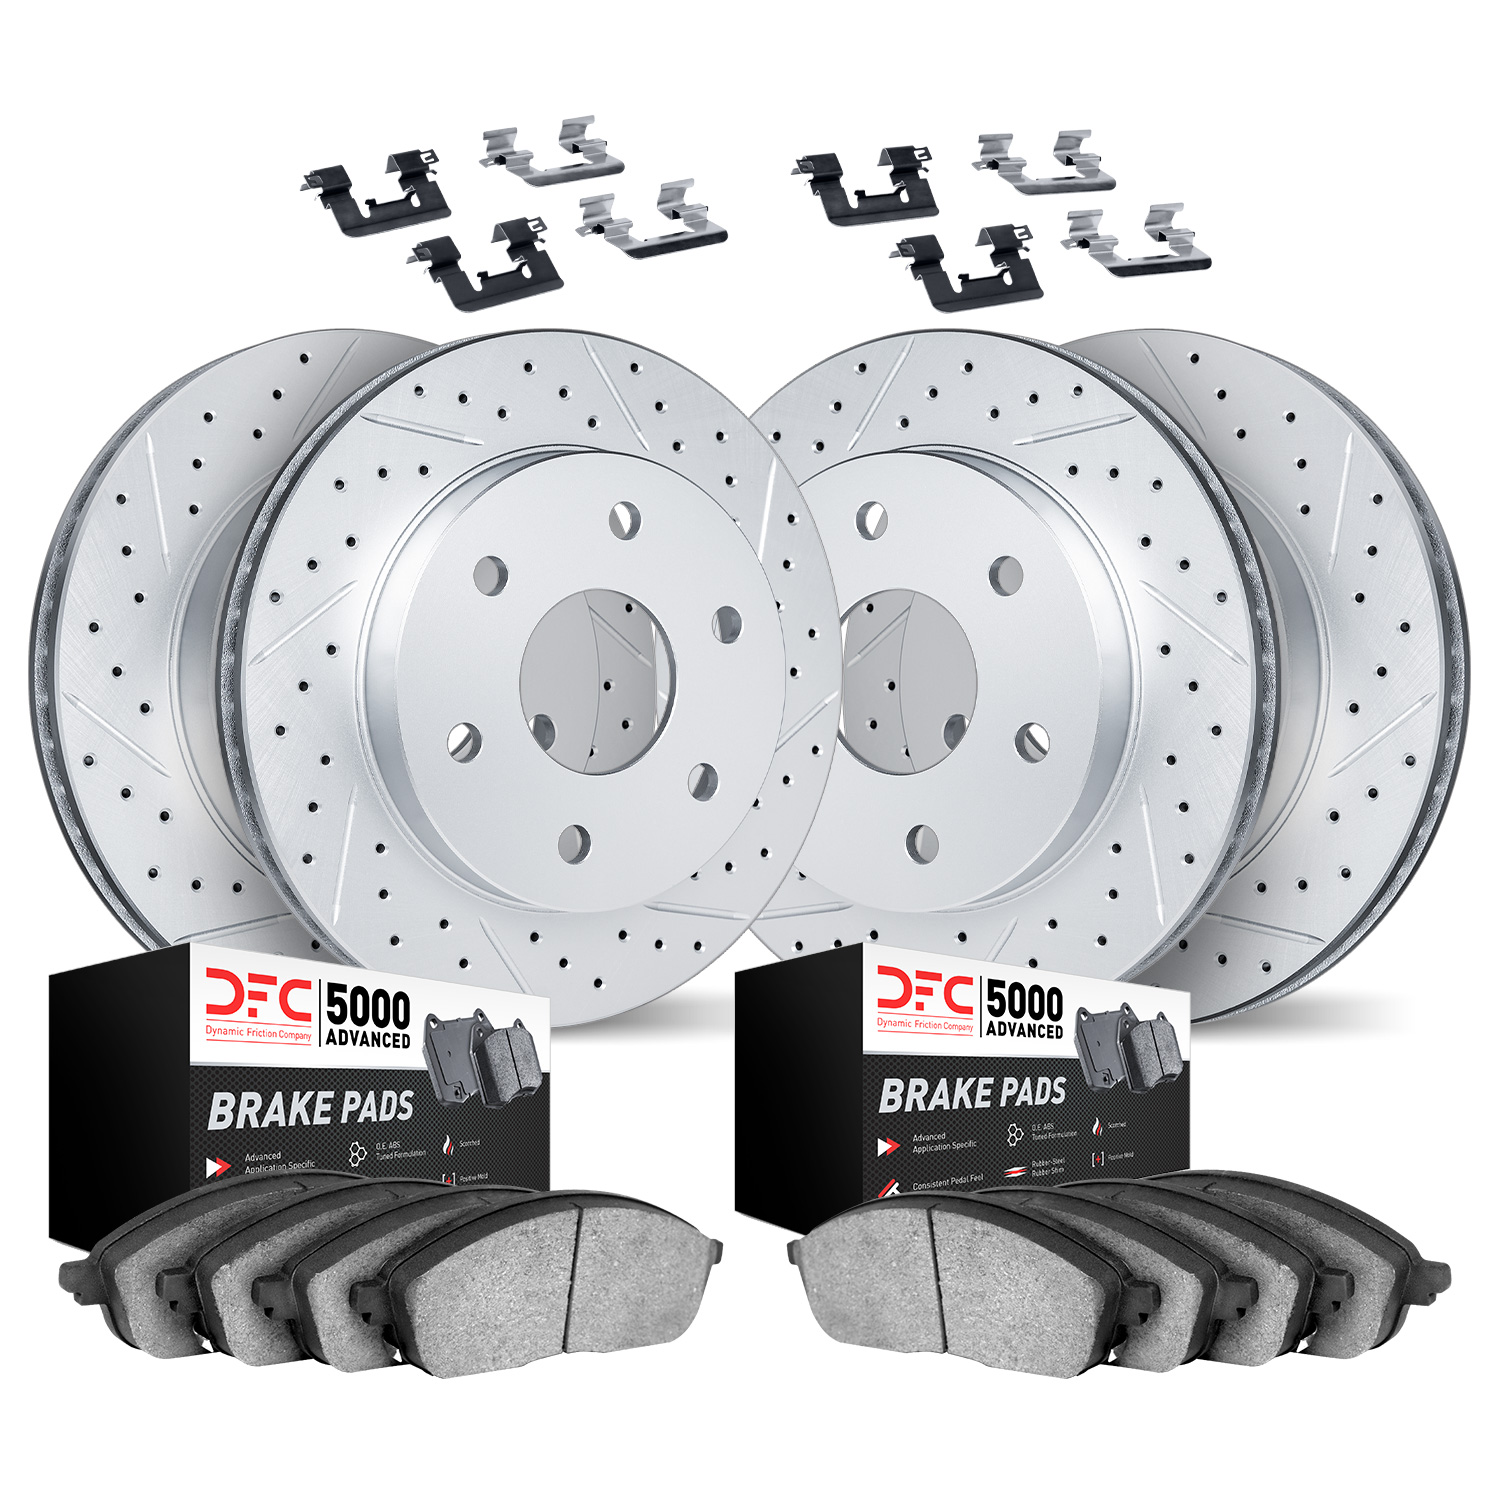 2514-46037 Geoperformance Drilled/Slotted Rotors w/5000 Advanced Brake Pads Kit & Hardware, 2004-2009 GM, Position: Front and Re